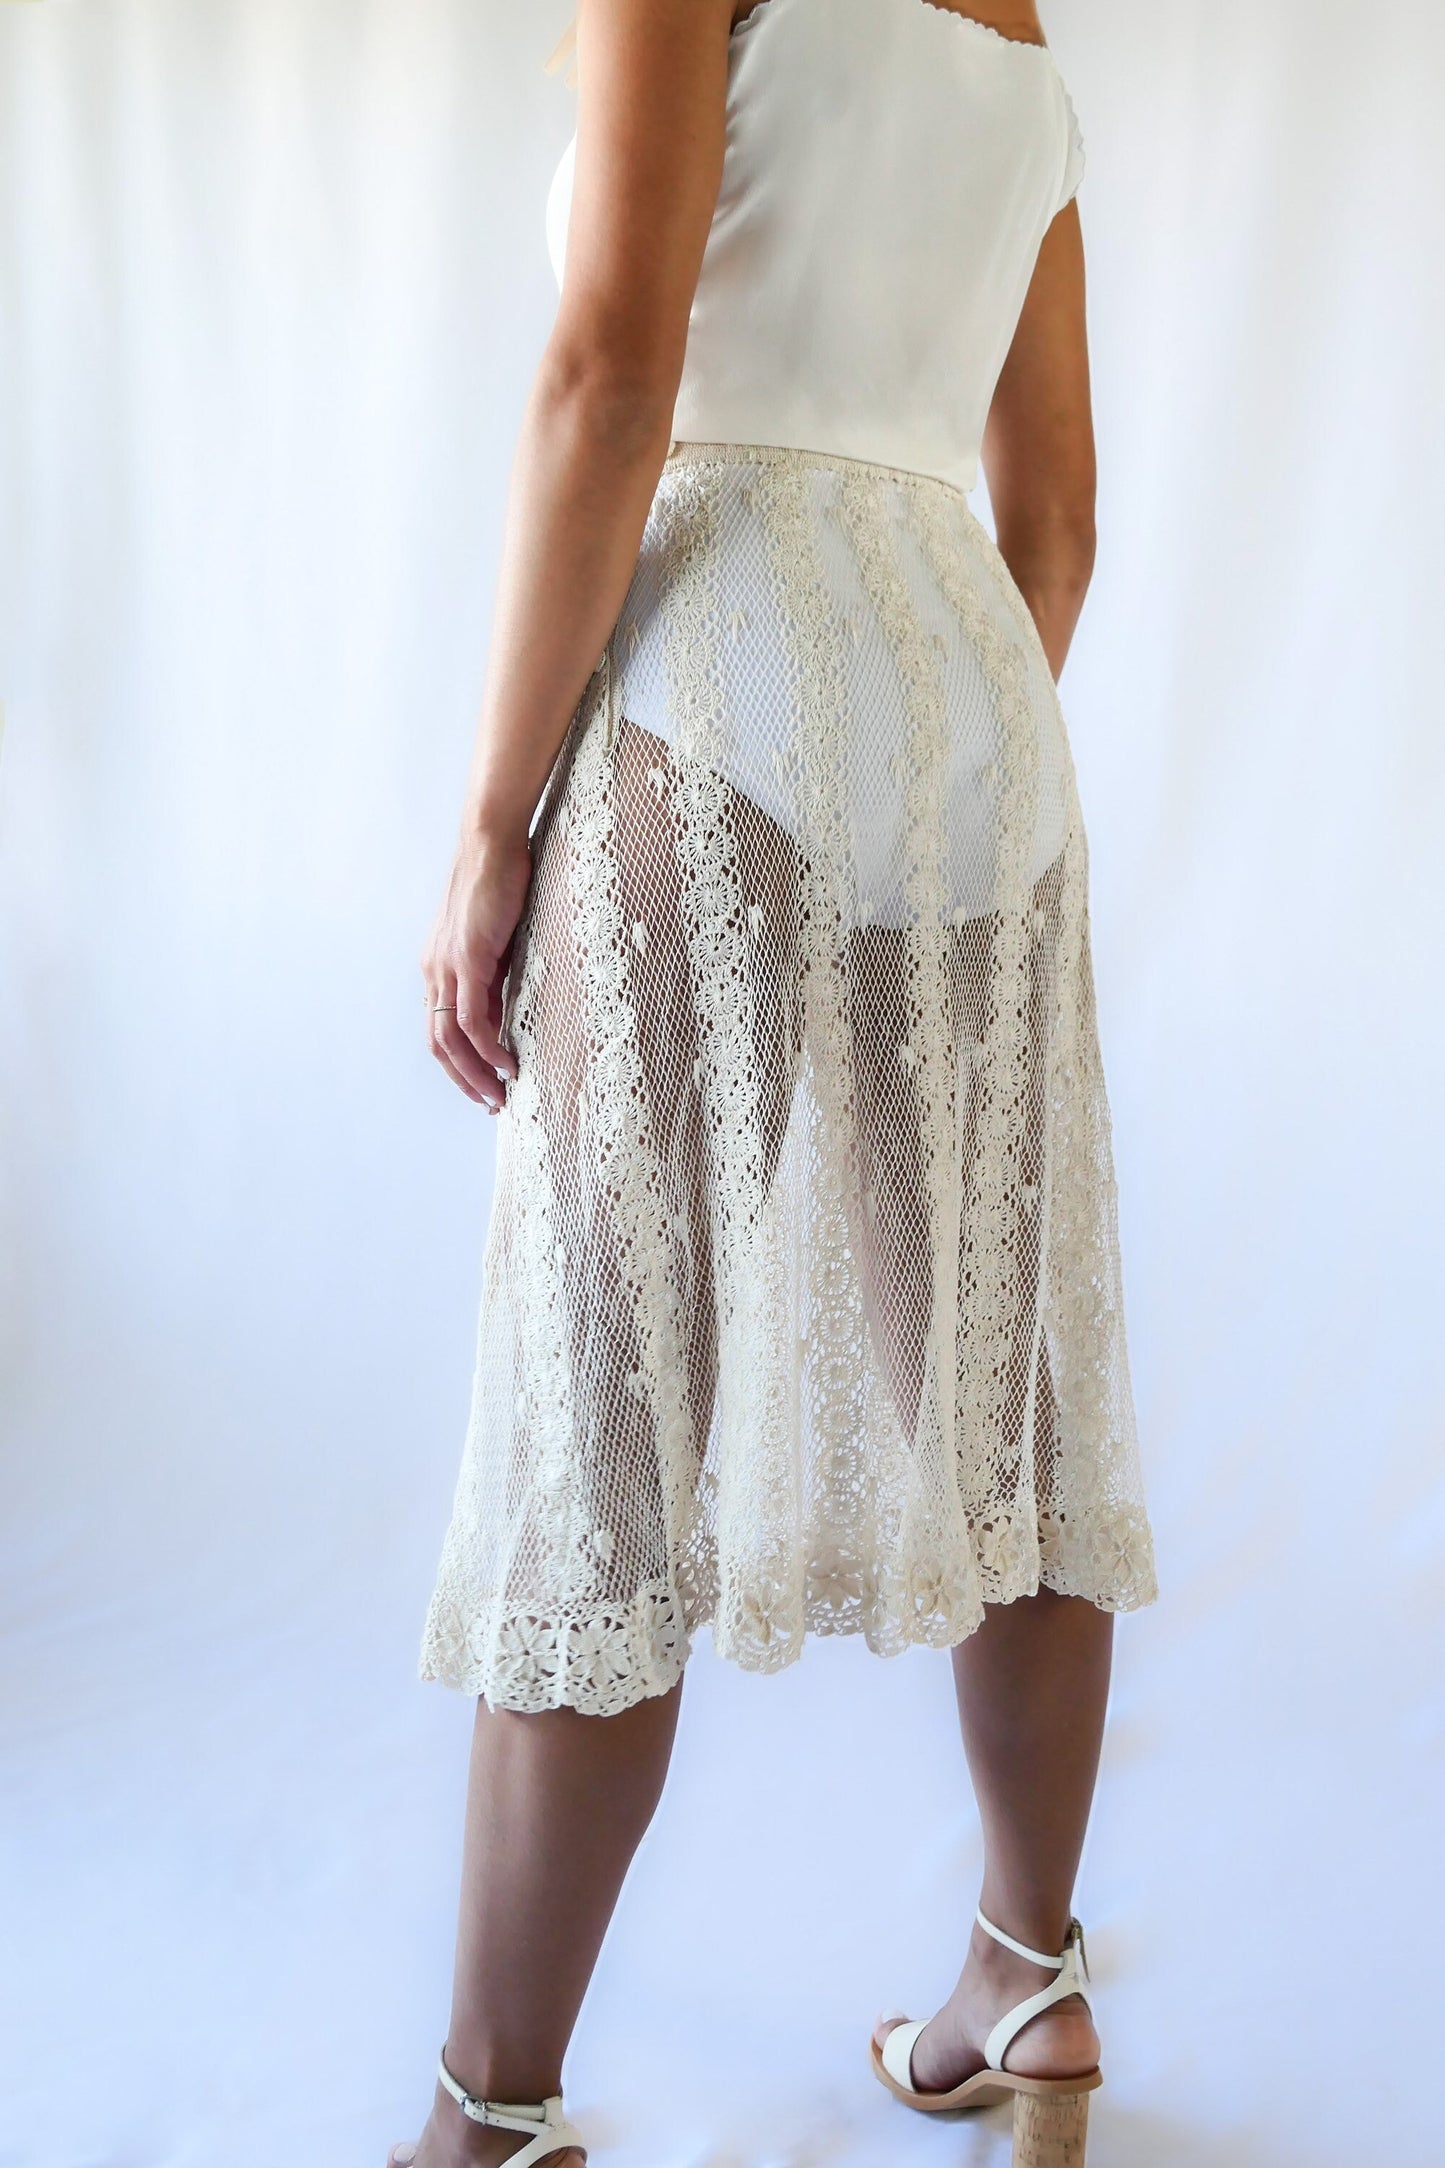 Hand Crocheted Sheer Midi Length Skirt with Vertical Stripes and Floral Motif Hem